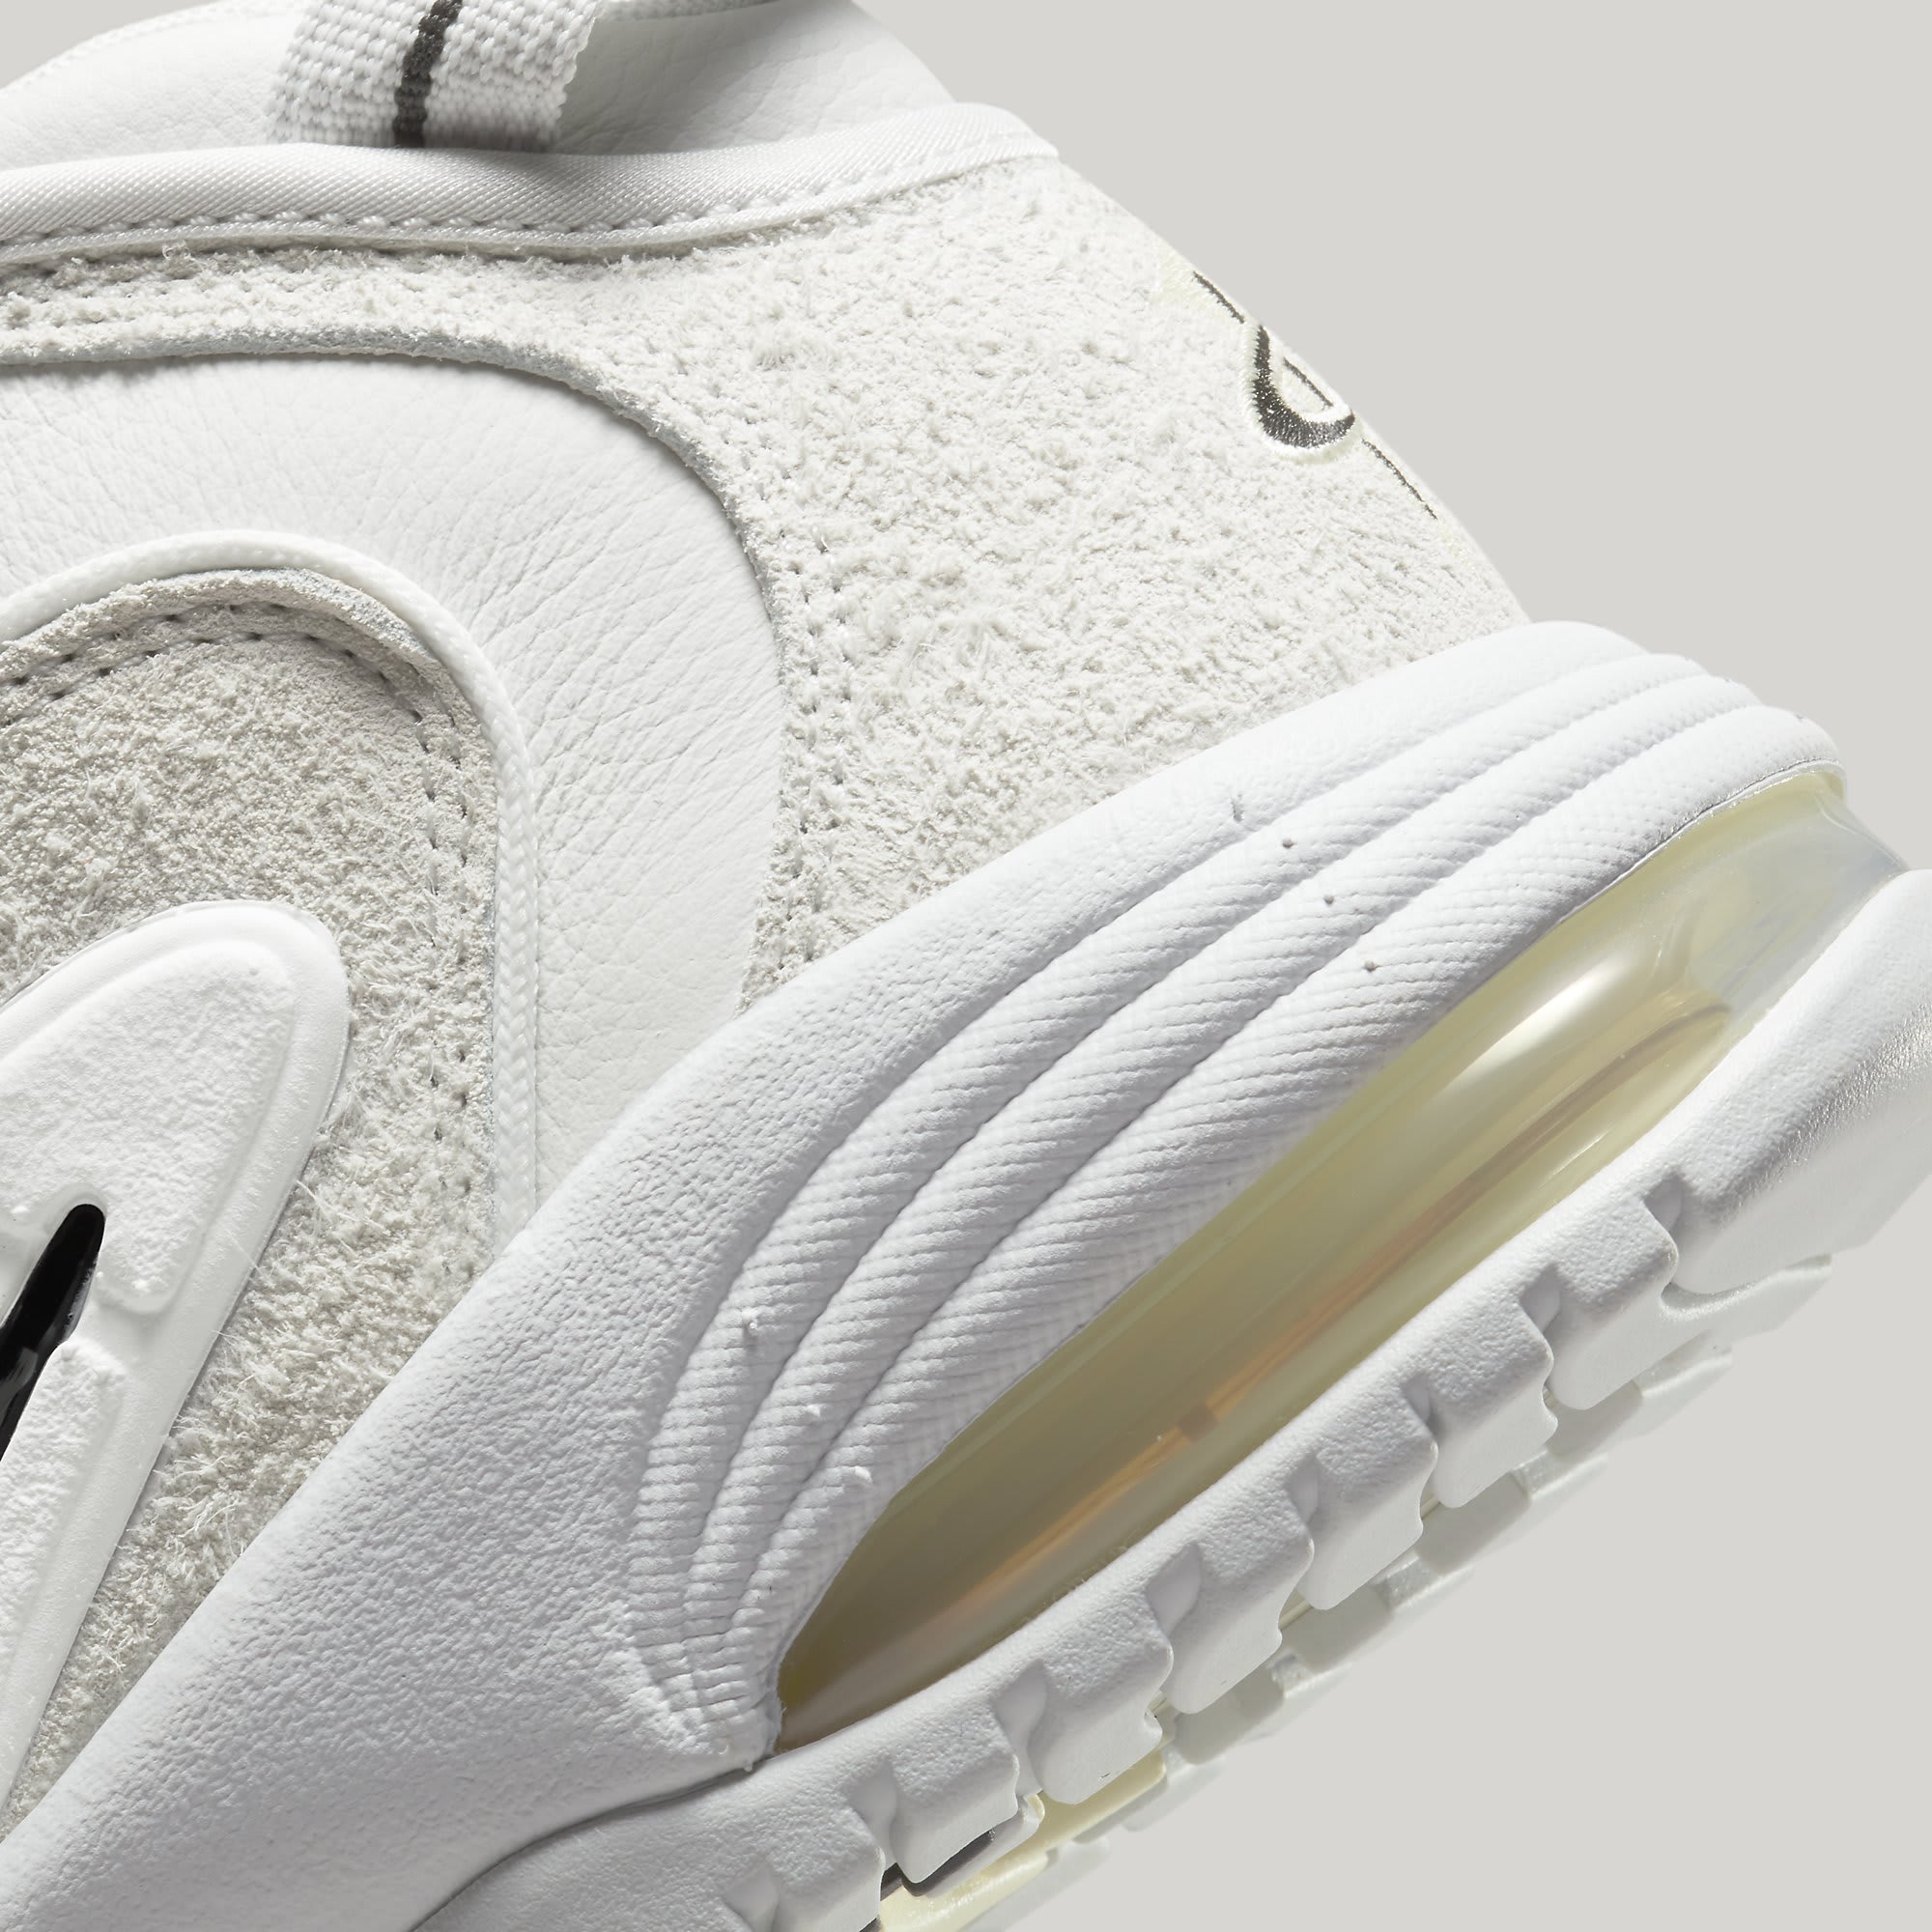 Nike Air Max Penny 1 Photon Dust Release DX5801-001 Heel Detail